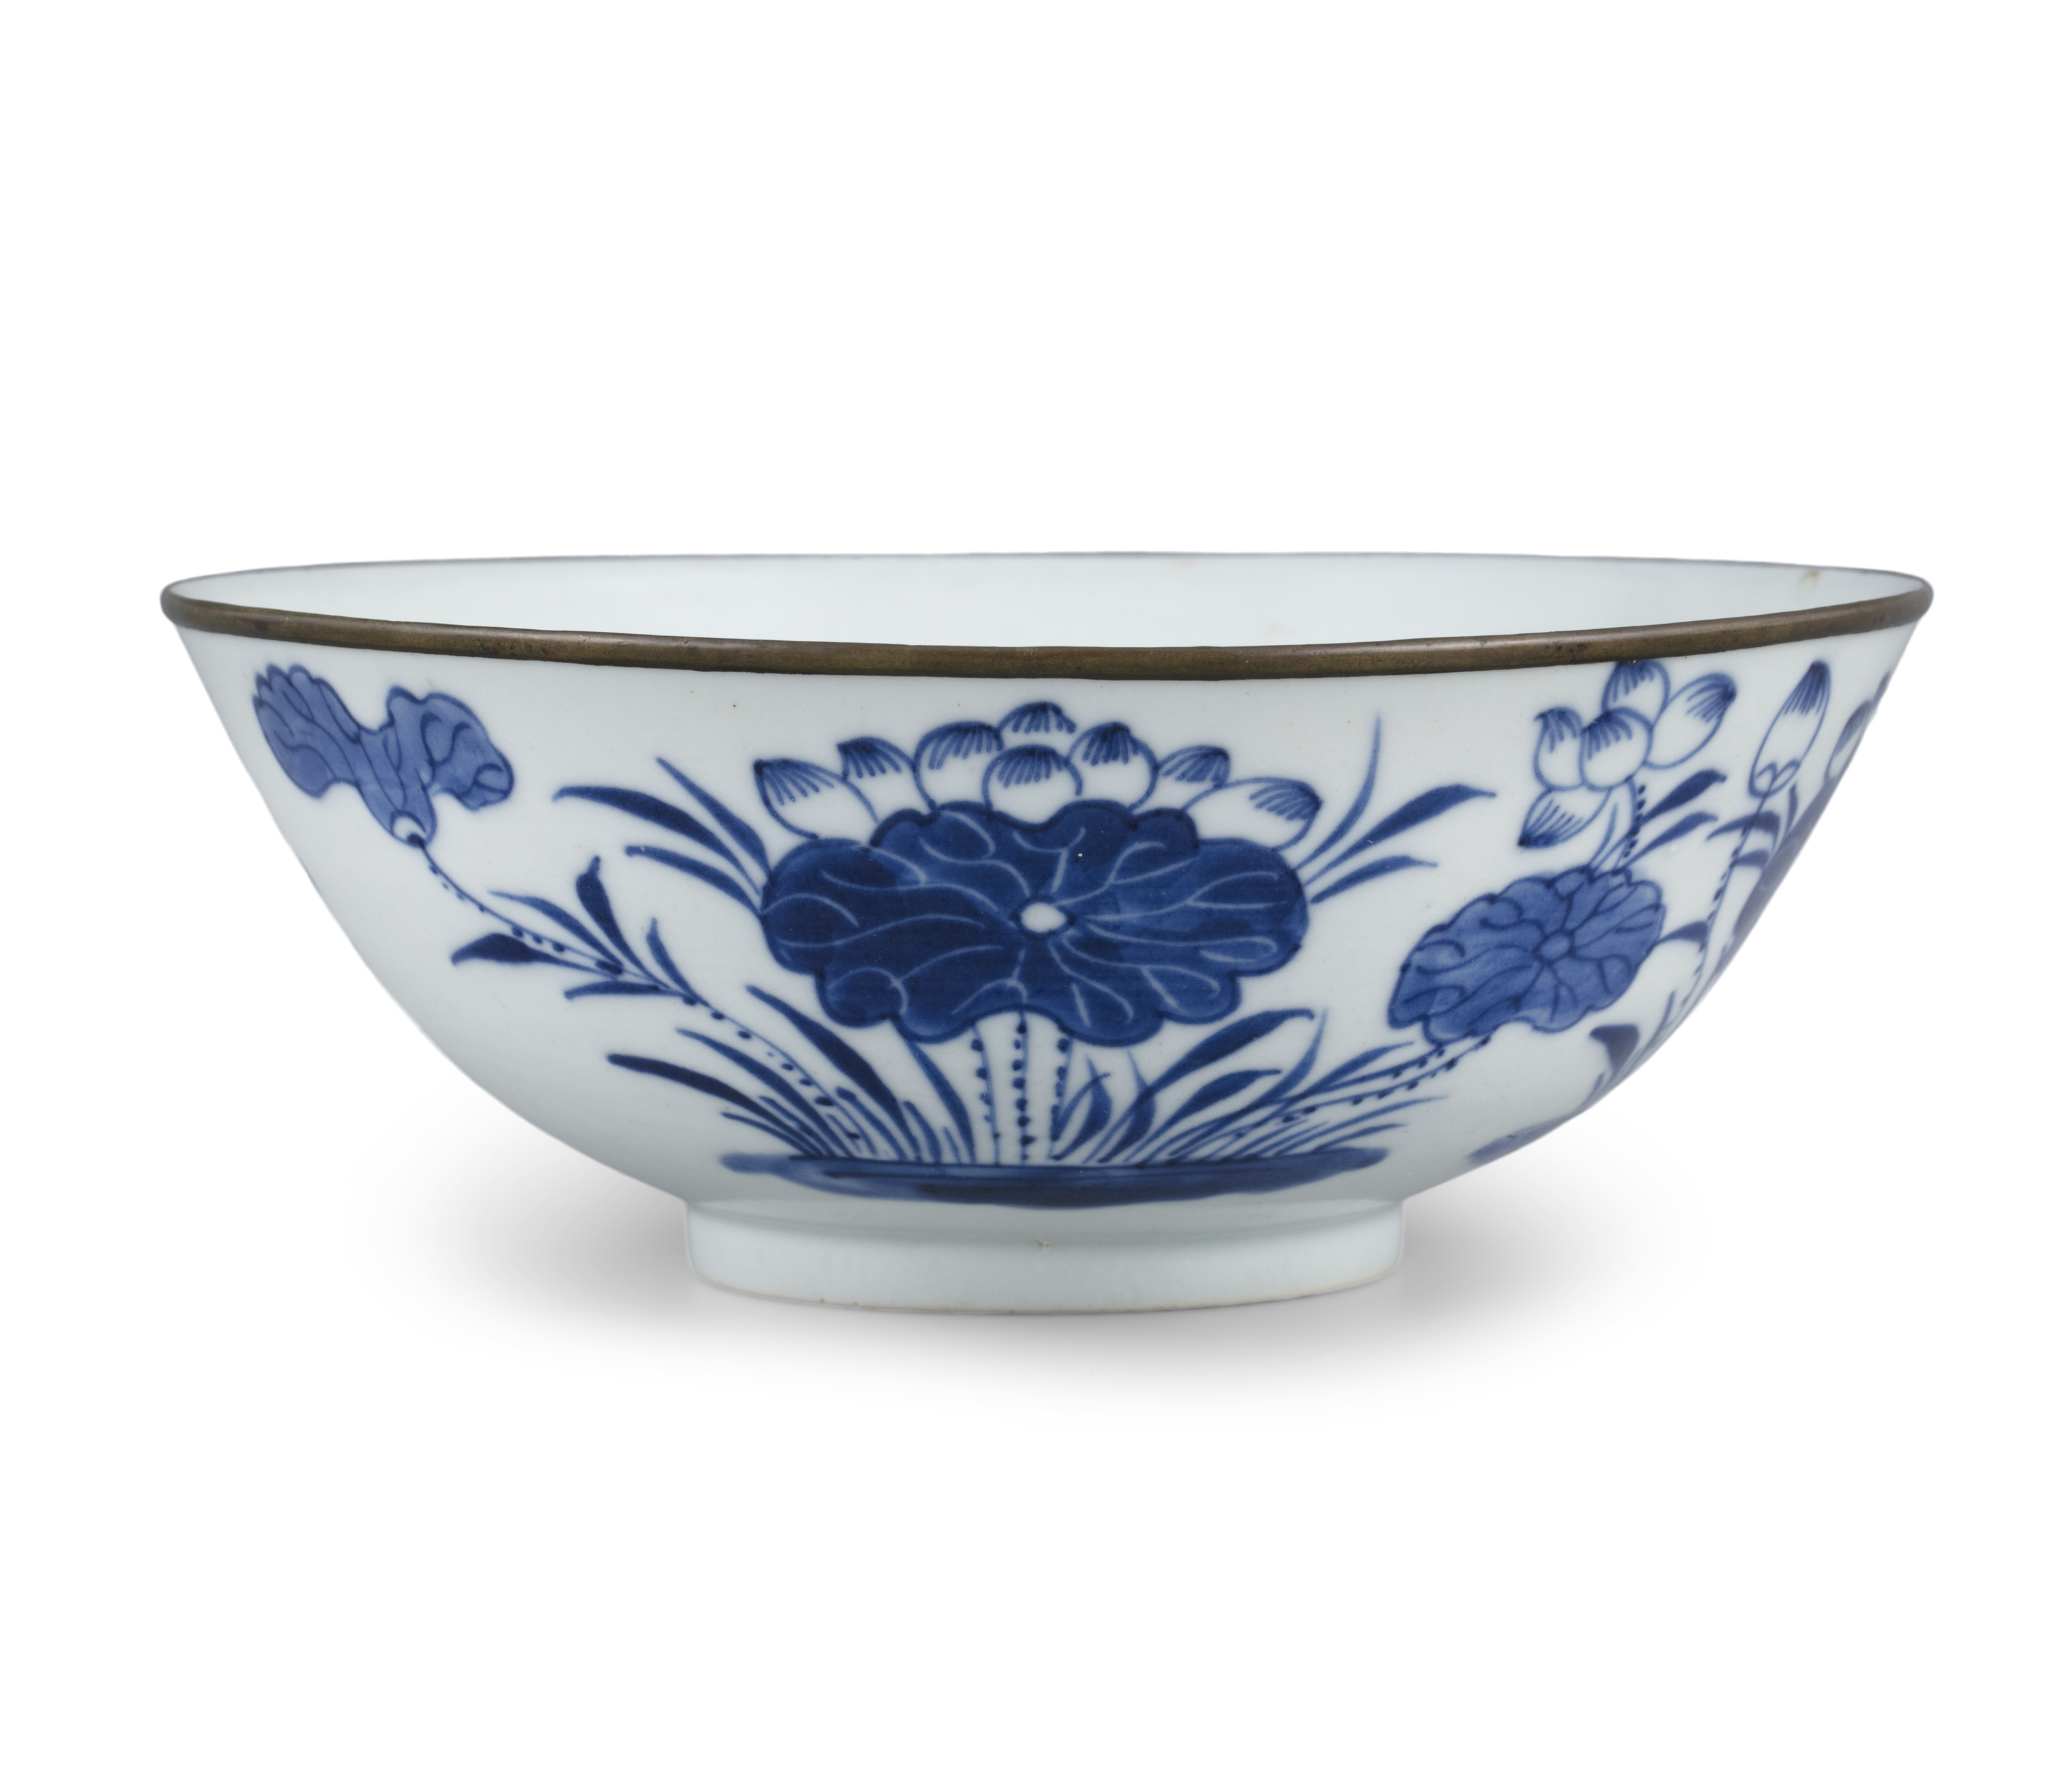 A BLEU DE HUE PORCELAIN BOWL ‘CRAB AND LOTUS POND’ BOWL INSCRIBED WITH THE MARK NGOẠN NGỌC 玩玉 - Image 14 of 18